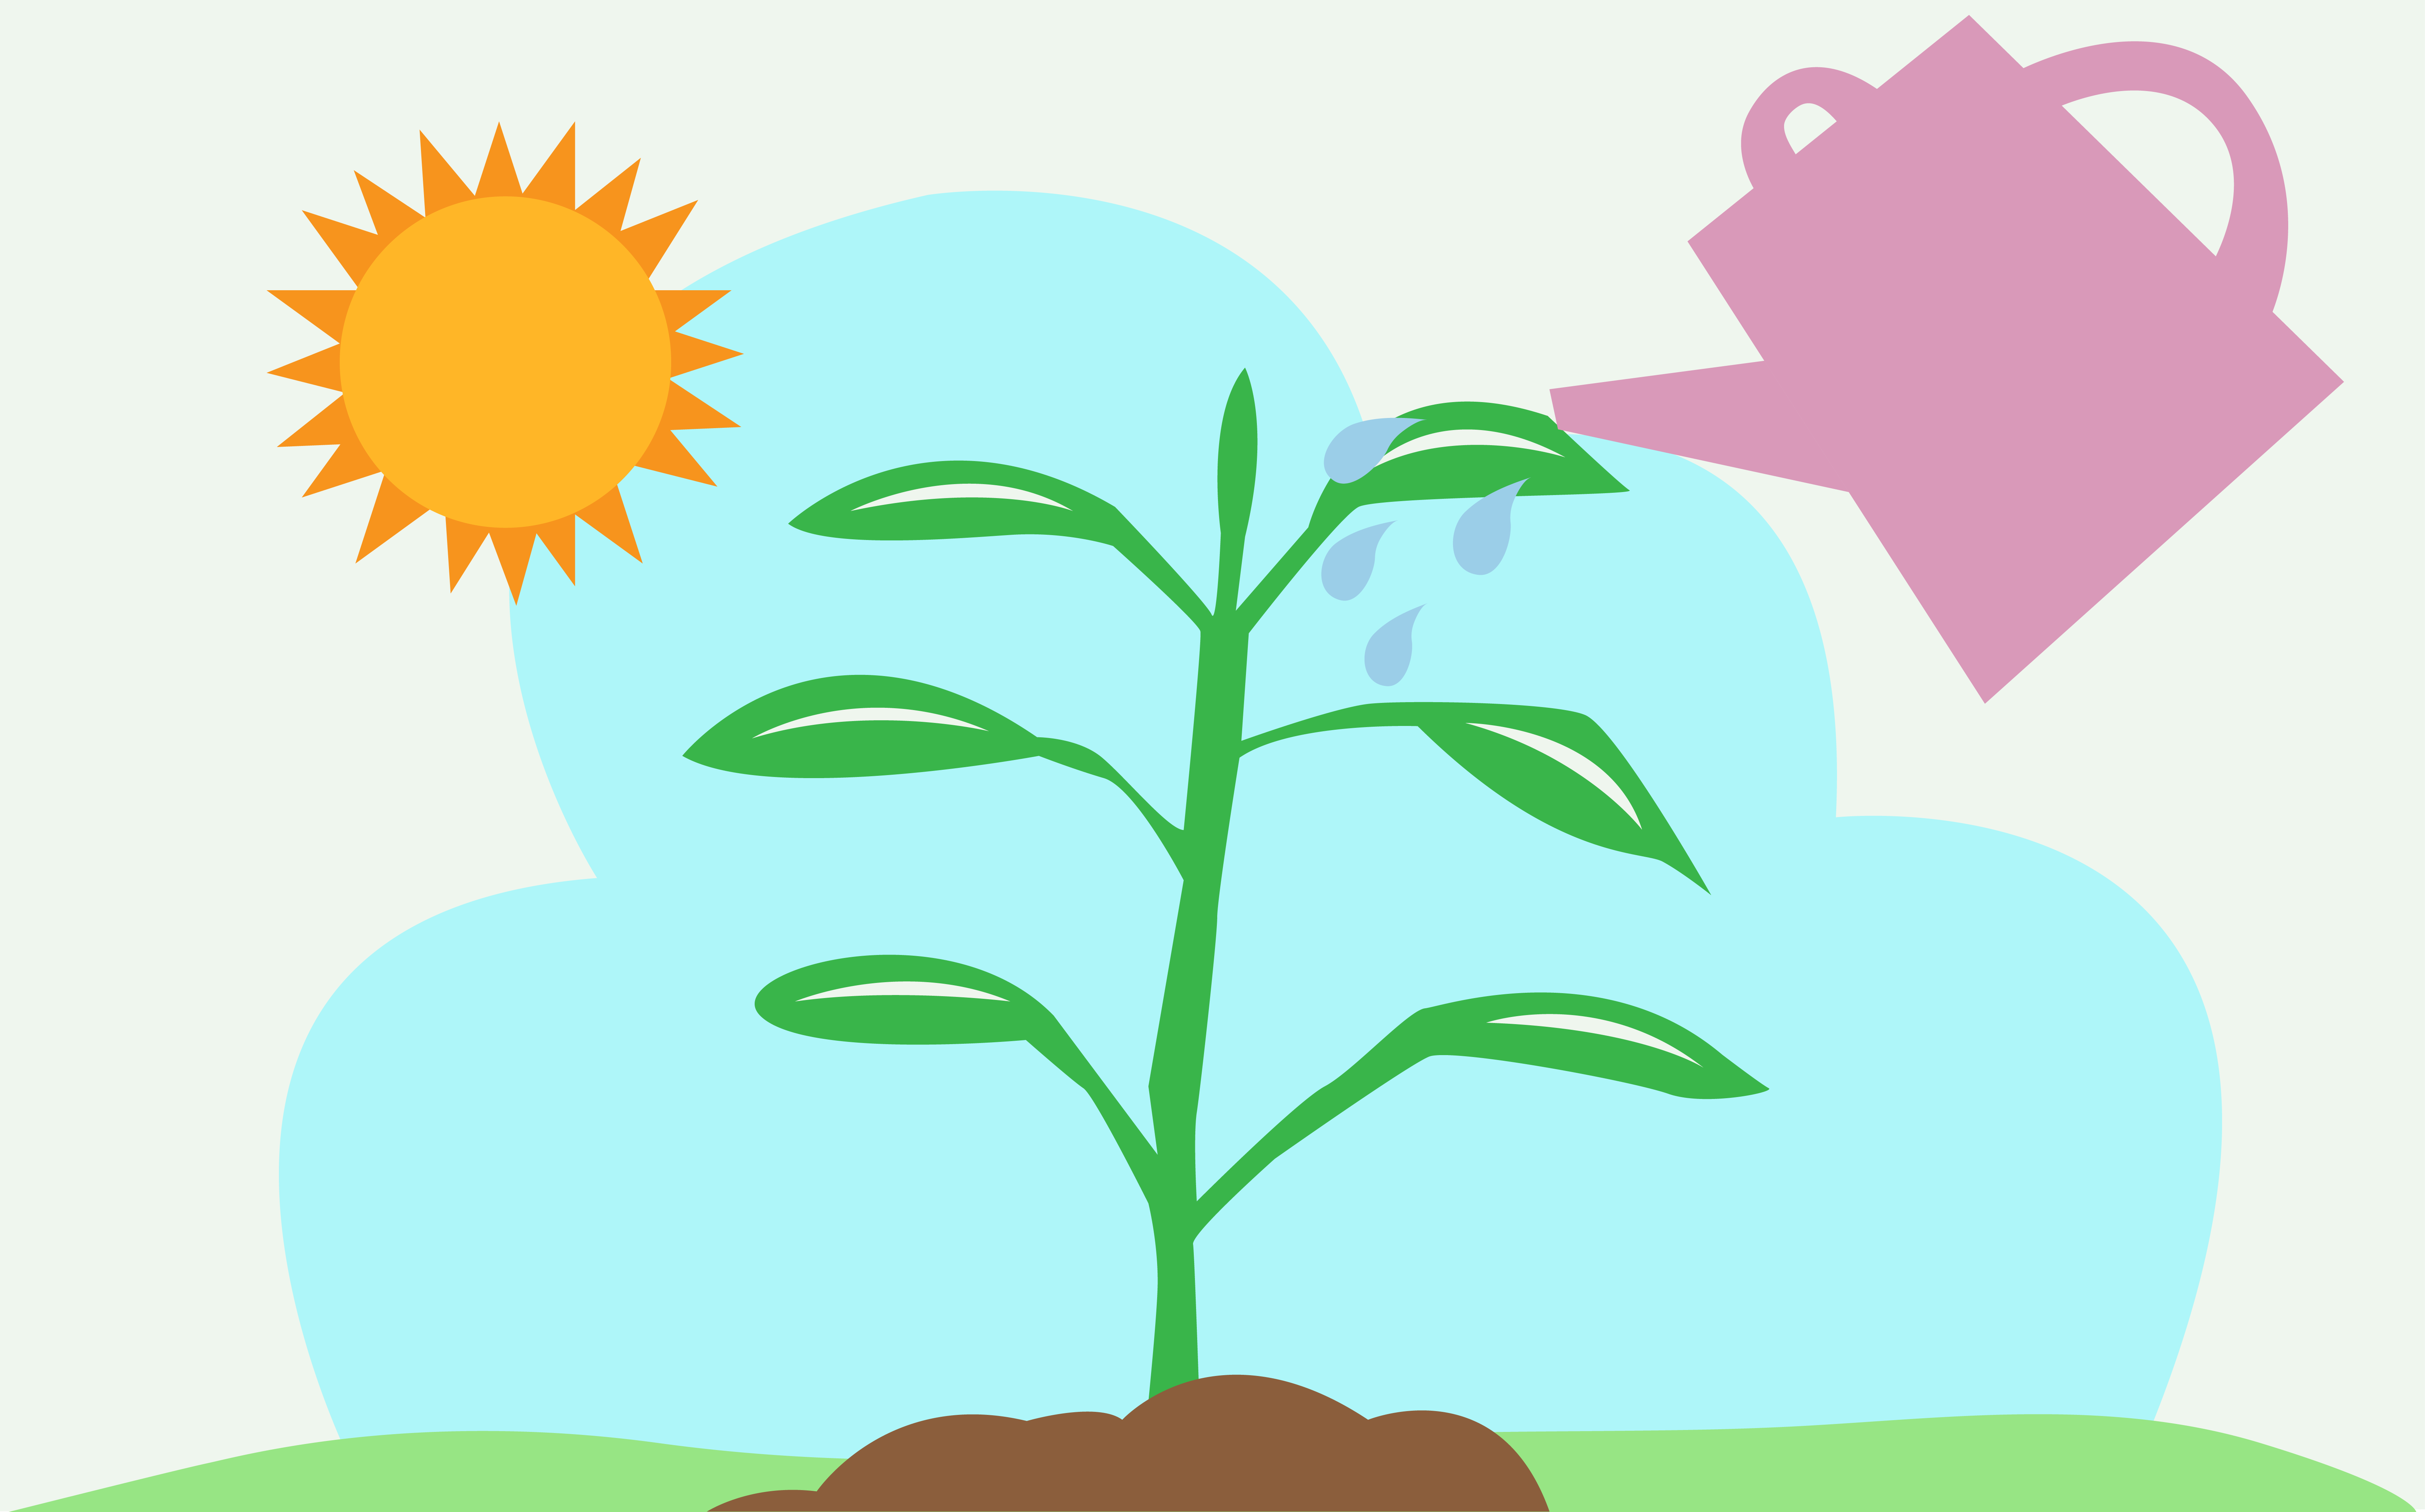 A watering can waters a plant under the sun, representing growth.